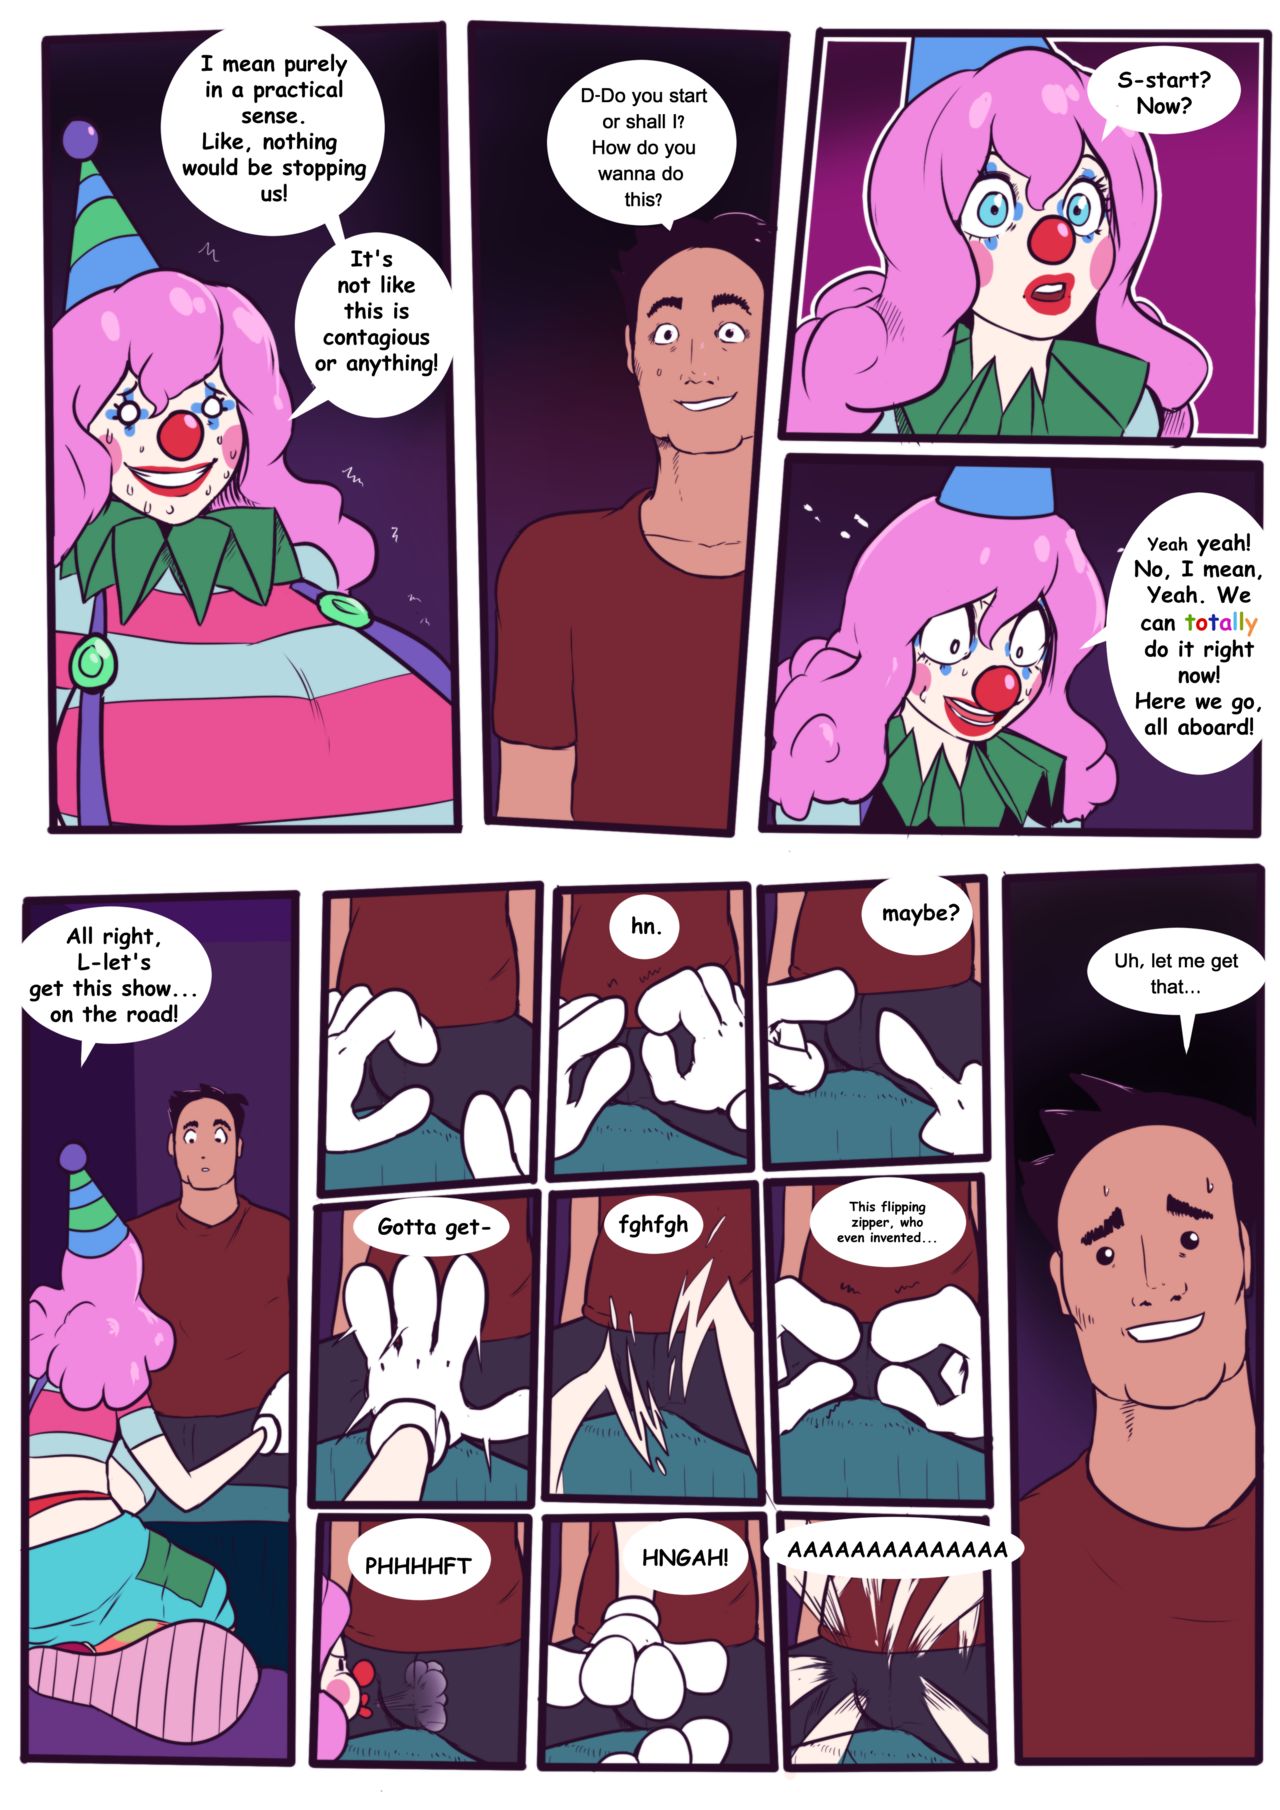 A Perfectly Normal Comic Where Nothing Weird Happens Lemonfont 15